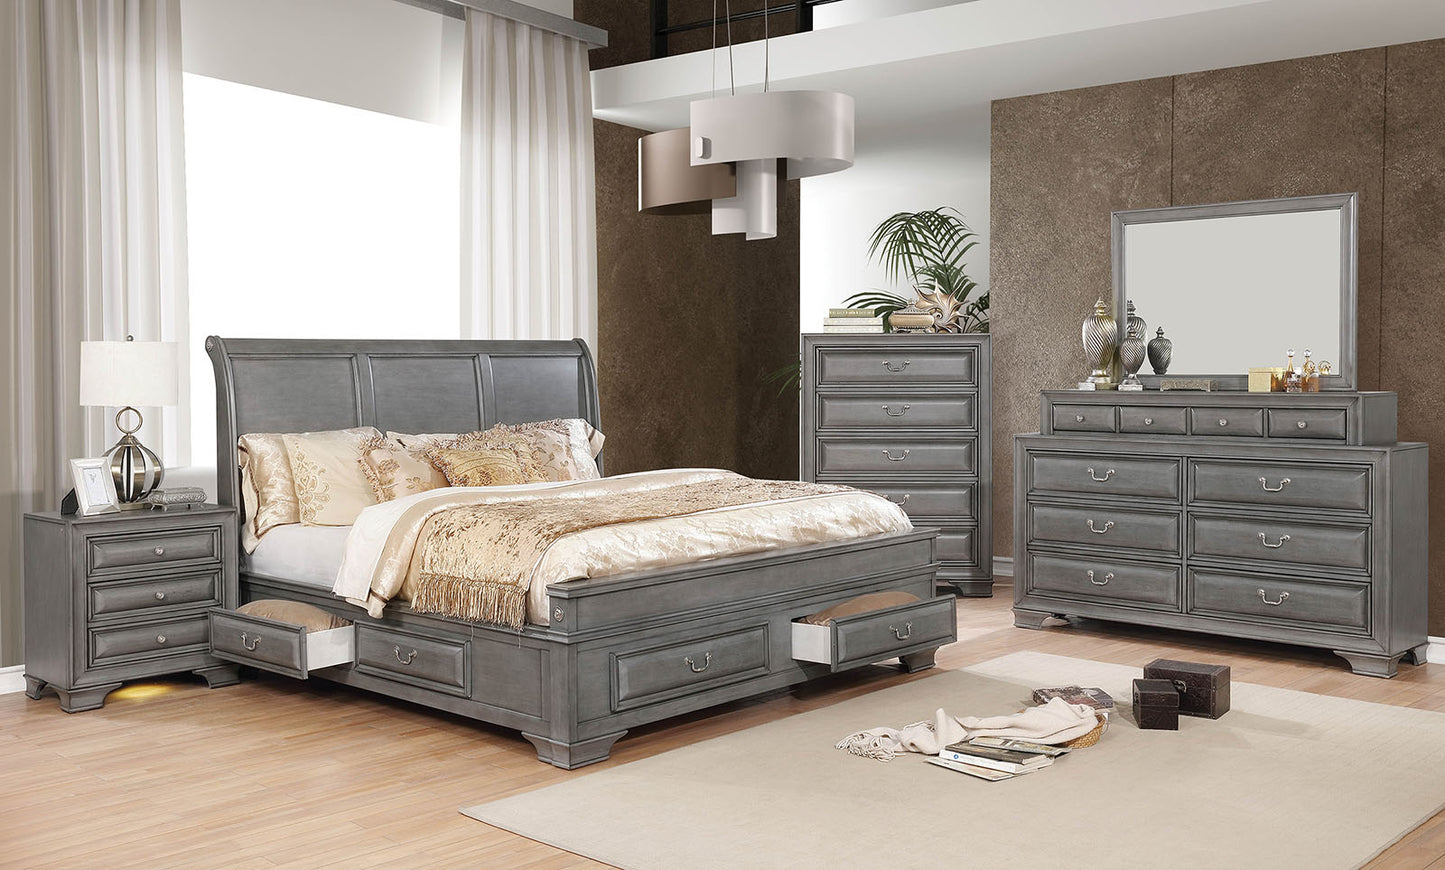 Furniture of America Brandt Bedroom Collection - Gray Finish